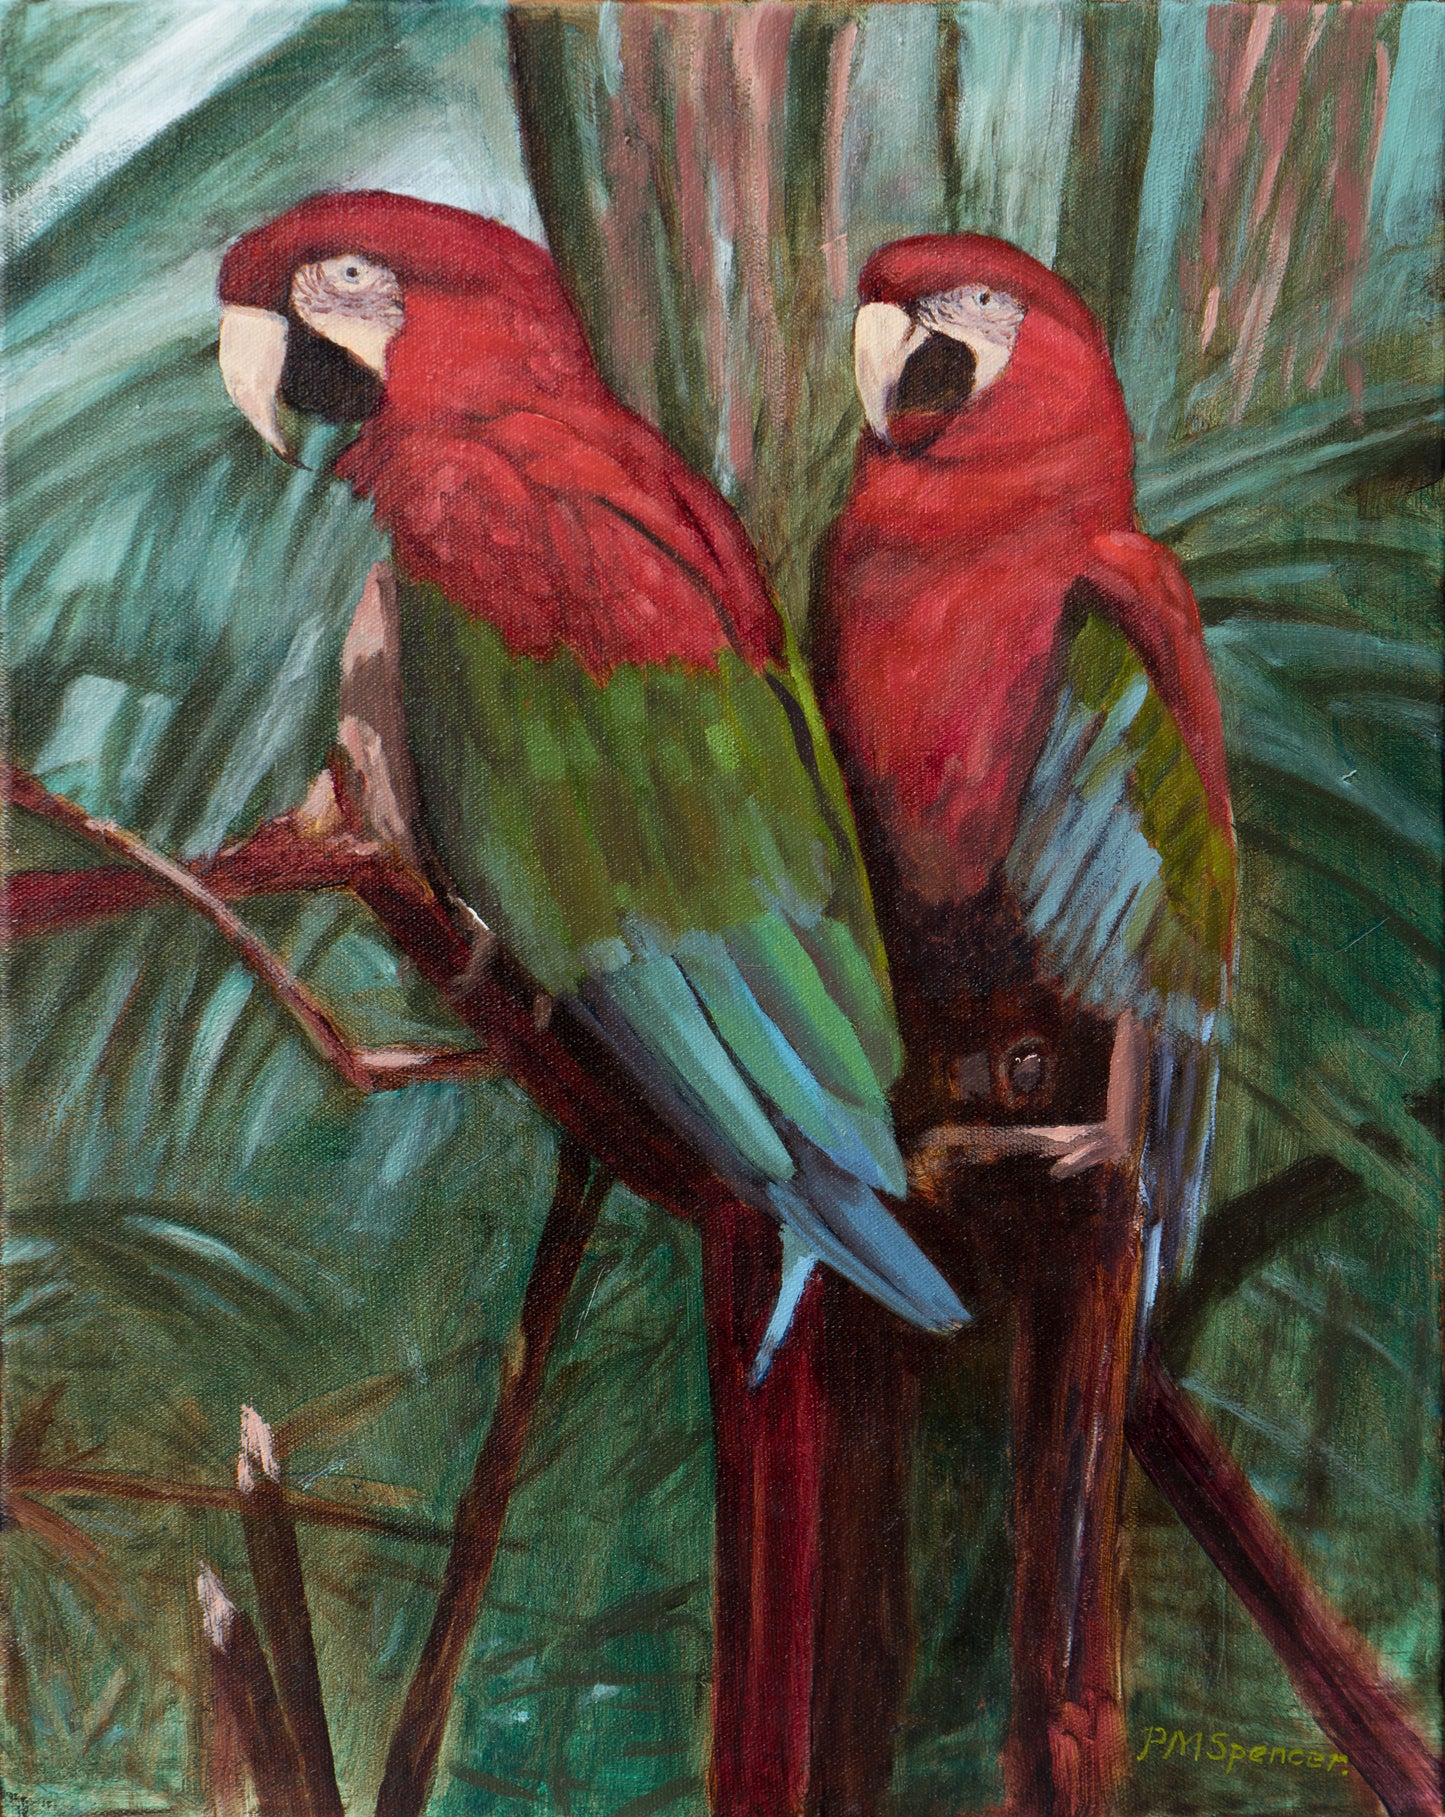 Here's Looking At You! Macaws.